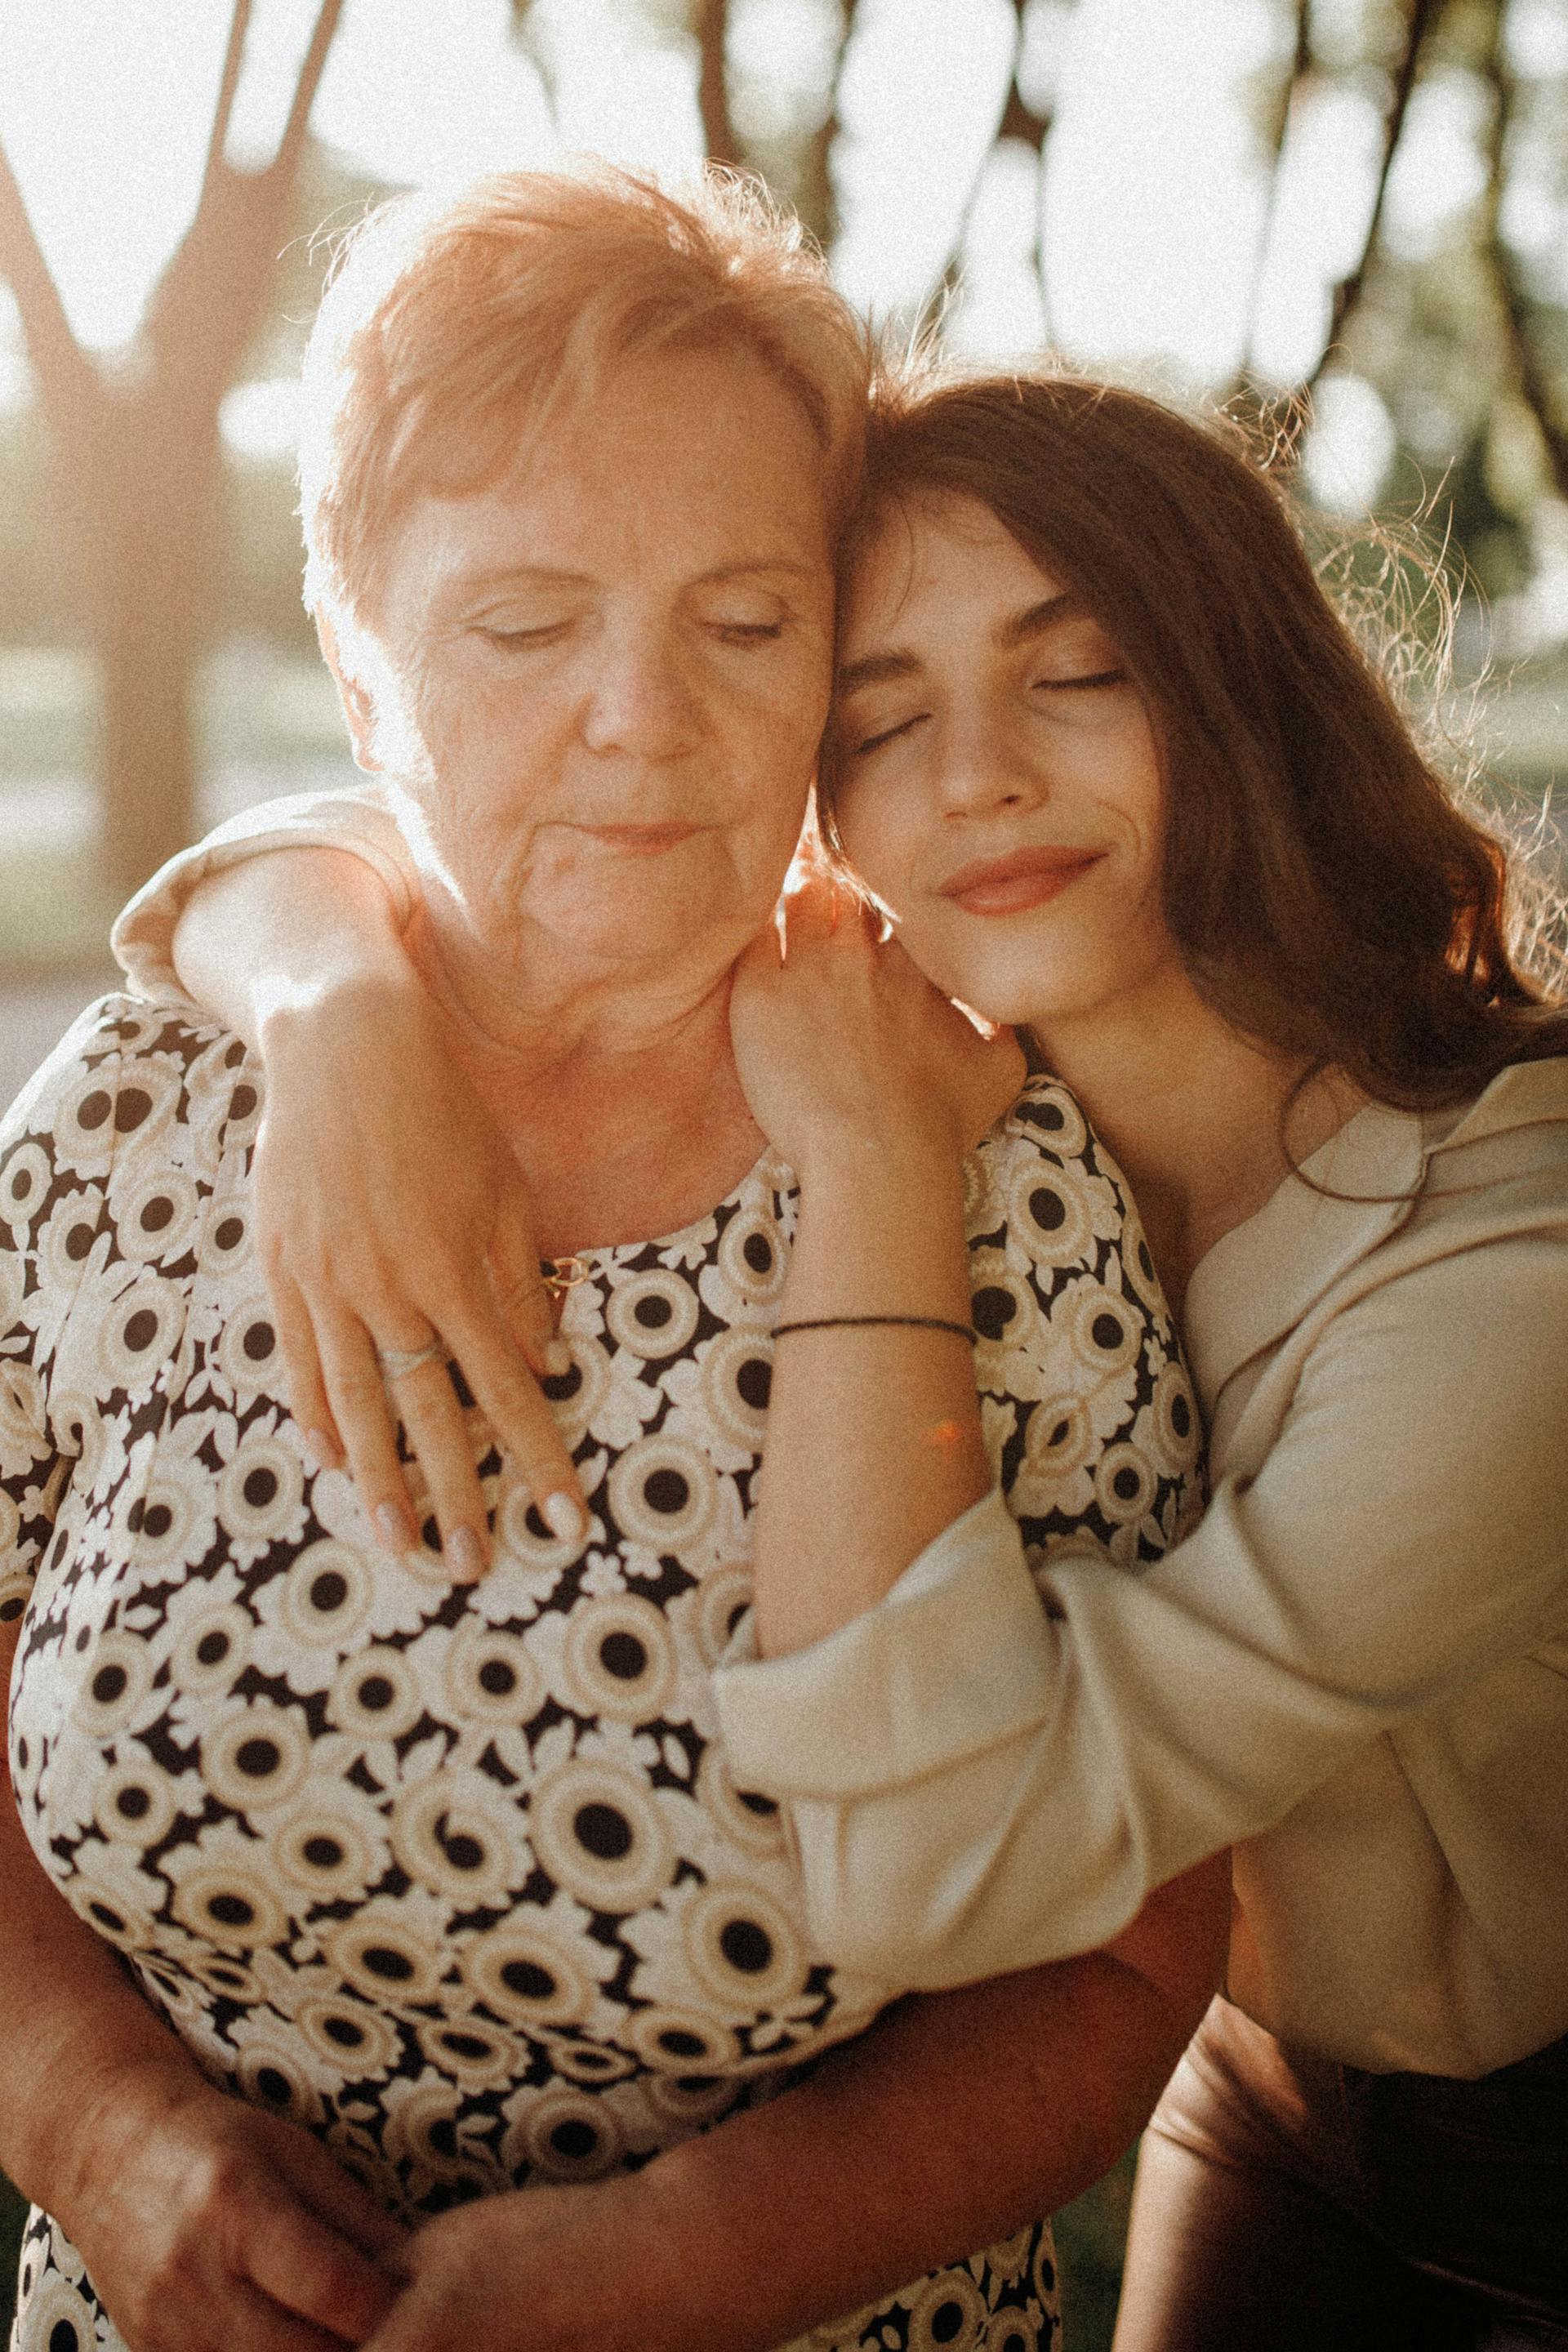 A daughter with her arms around her mother | Source: Pexels